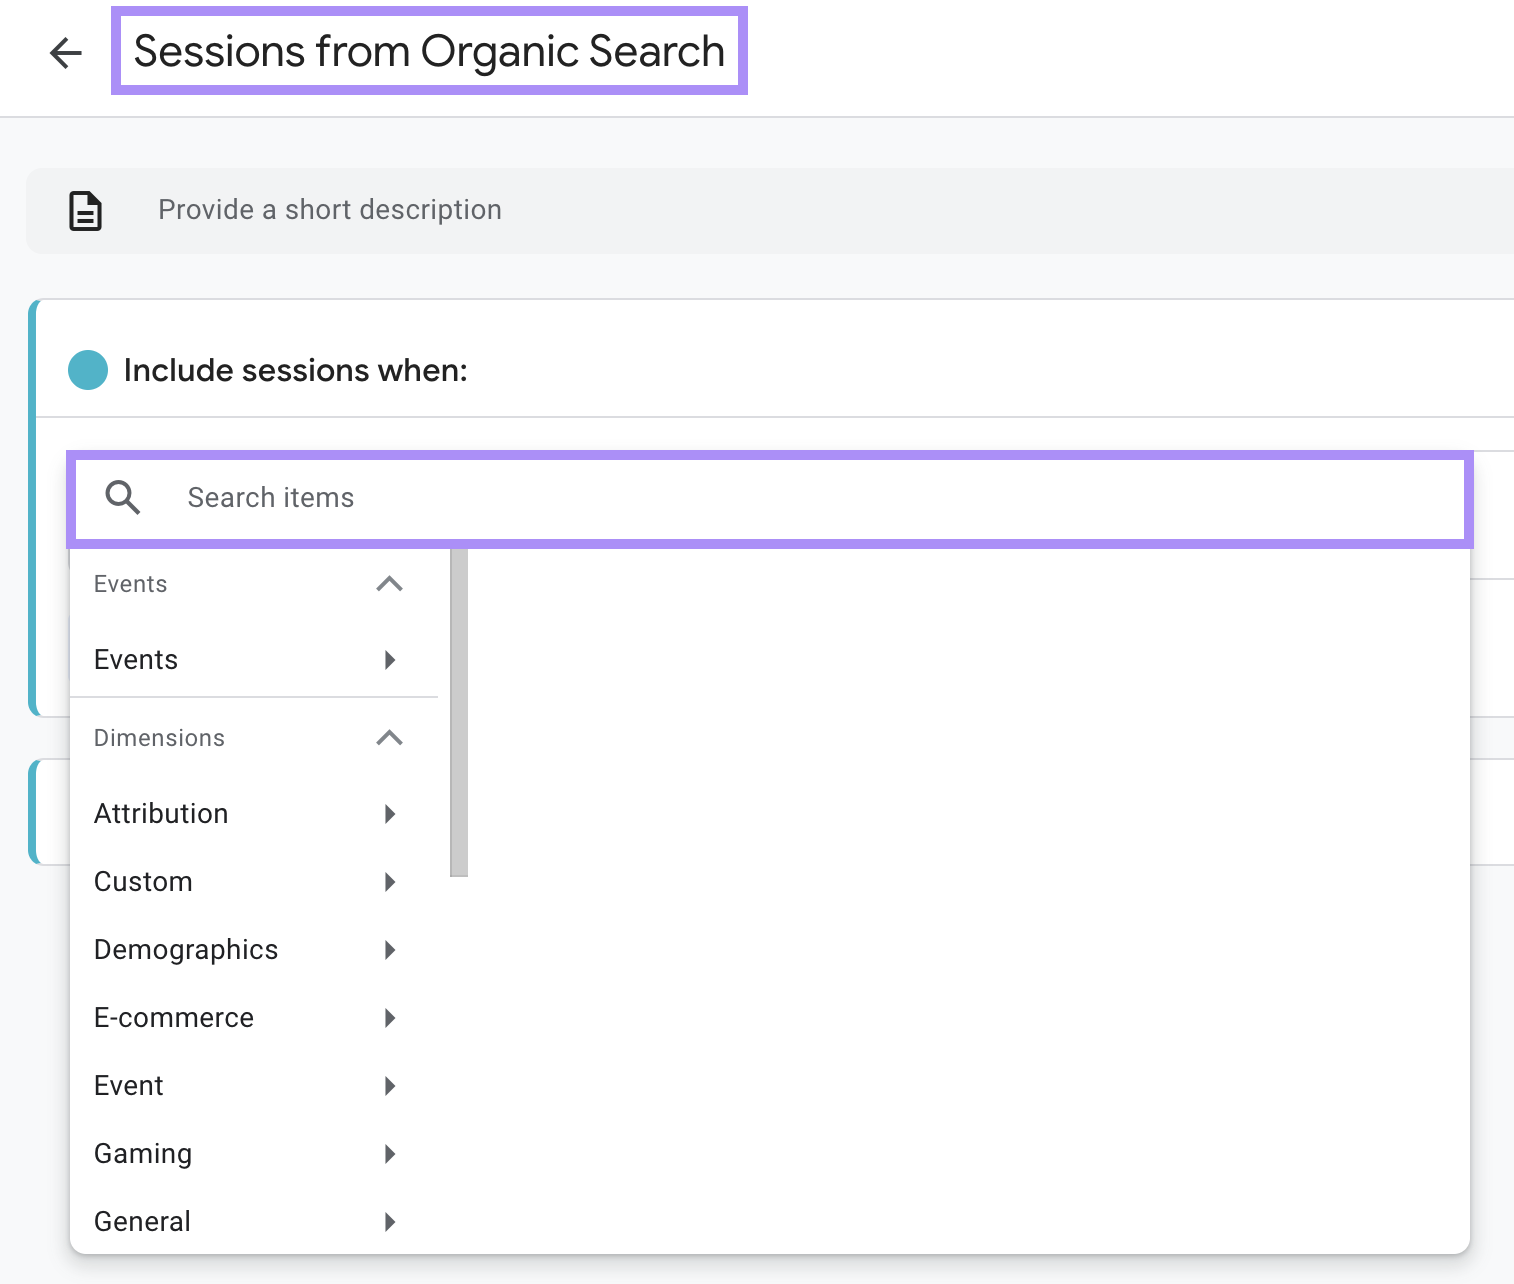 A searchable dialog box opened under the segment “Sessions from Organic Search